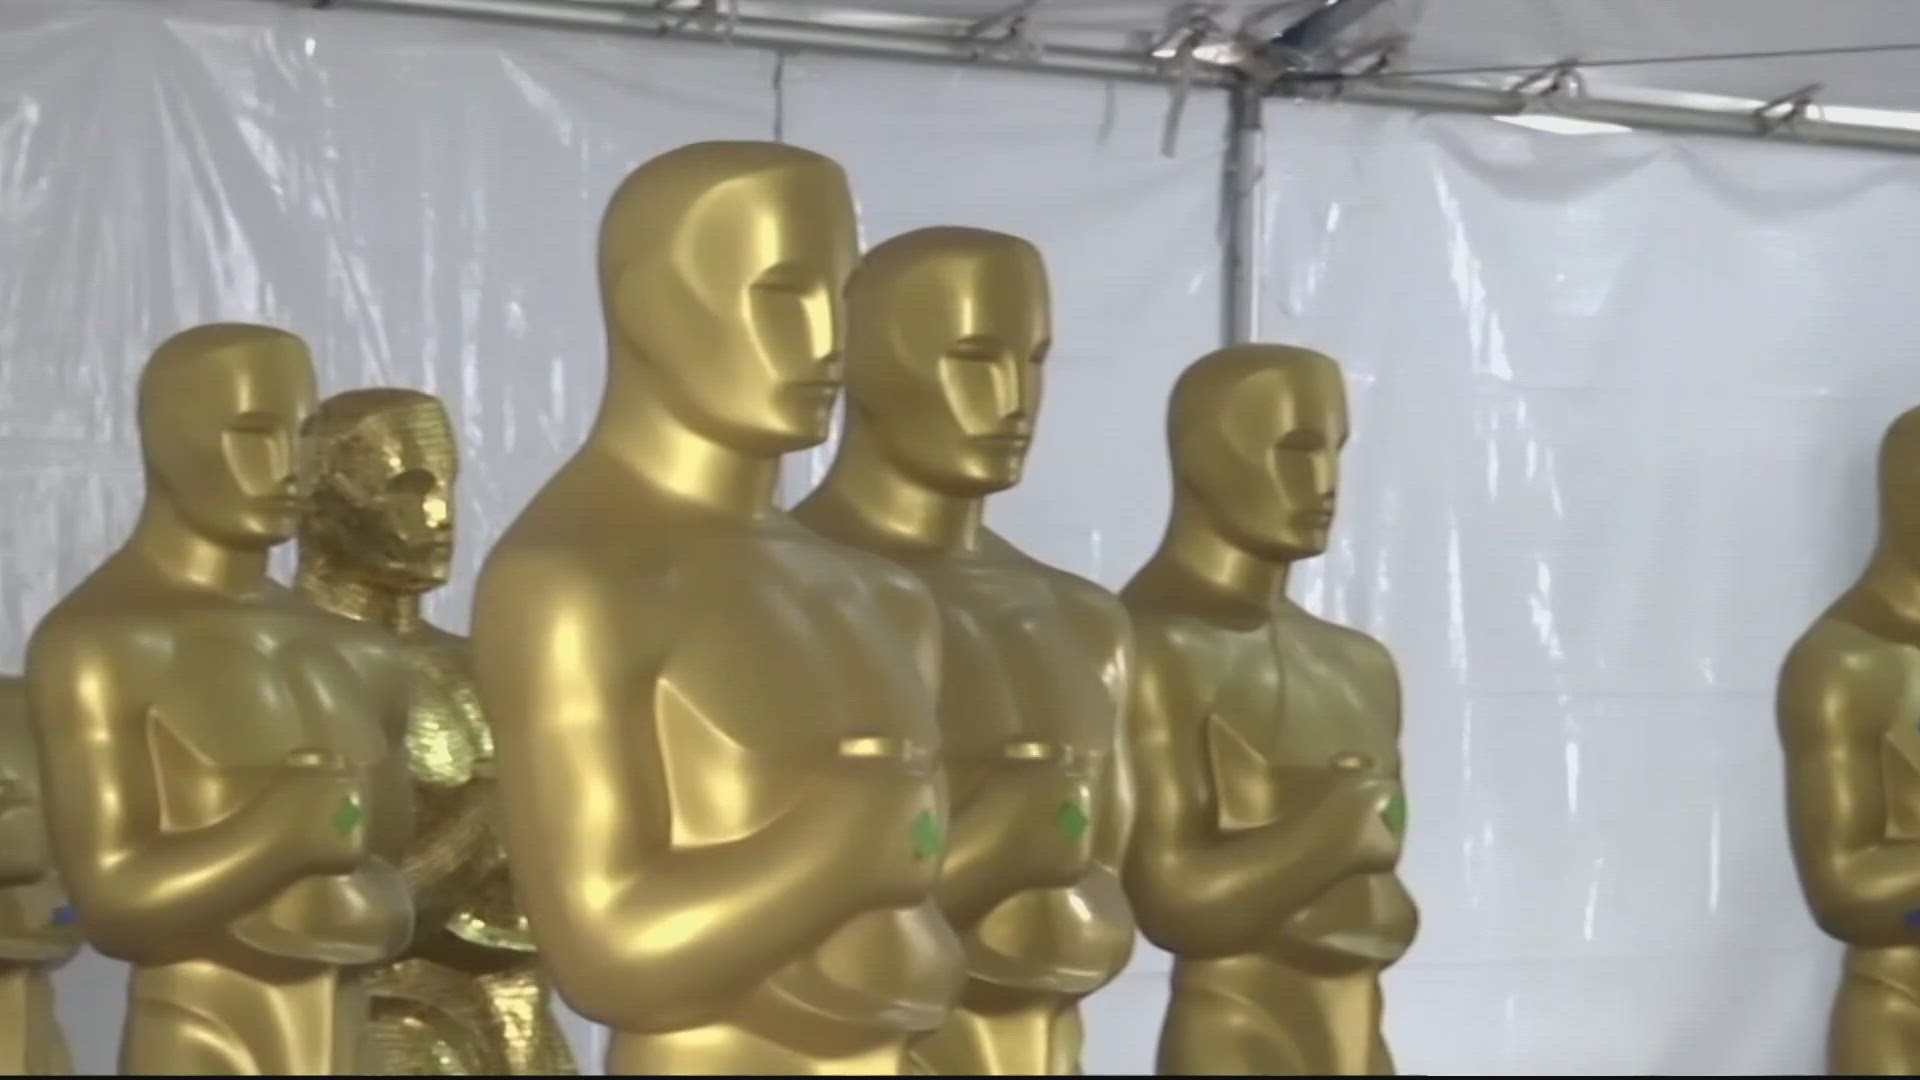 Crews spent the weekend preparing for the 95th Academy Awards. For the first time since 1961, there will be no red carpet.